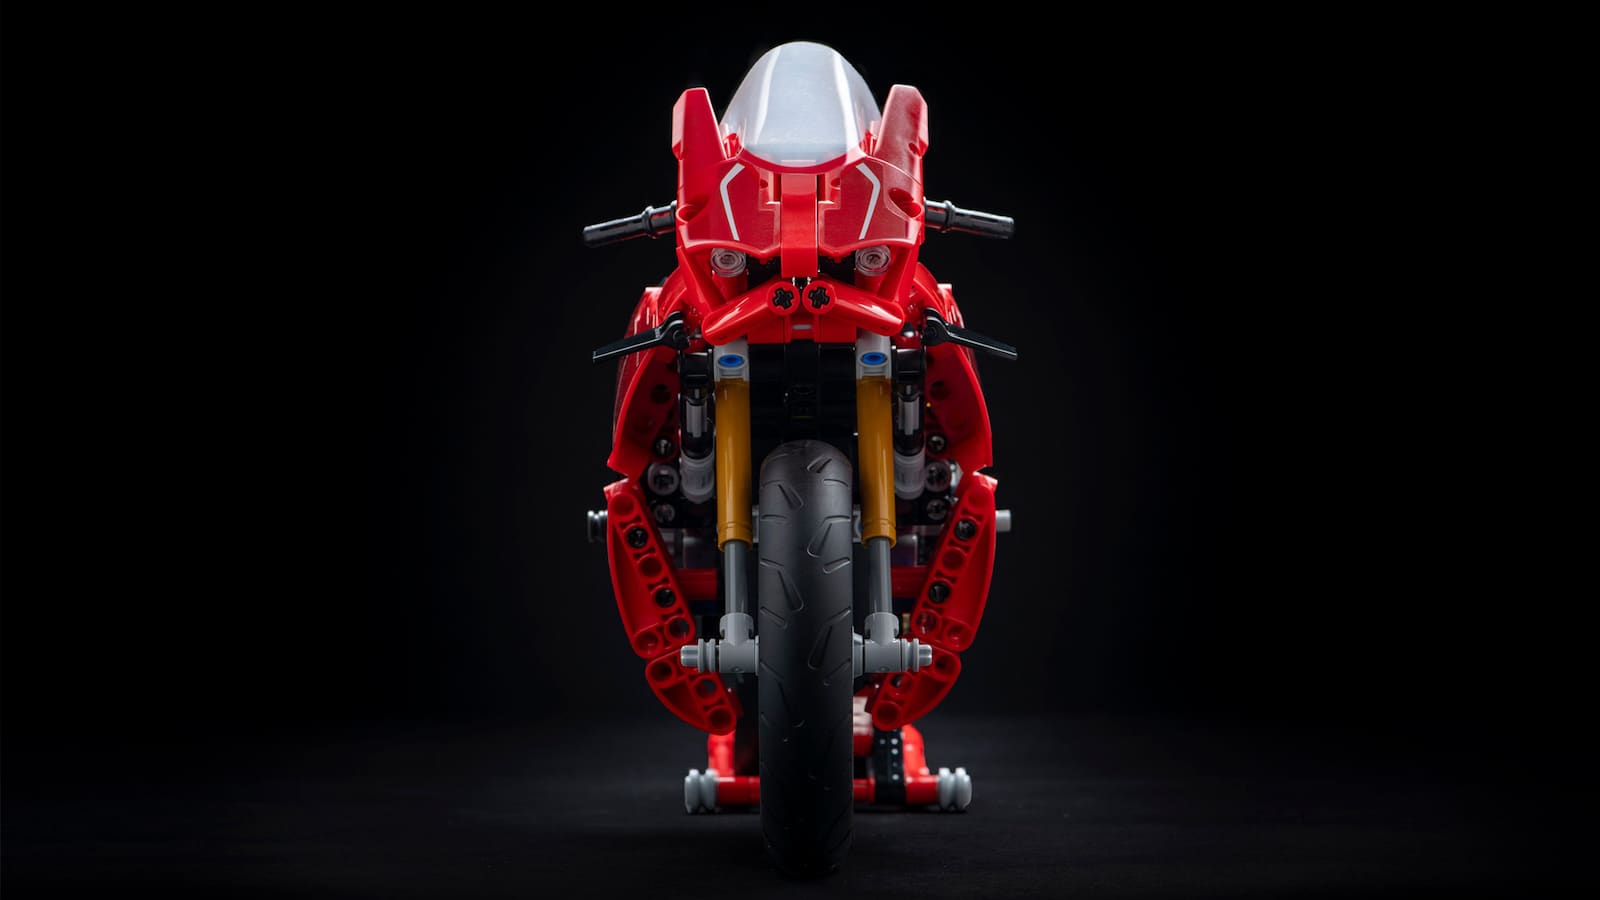 Lego Ducati Panigale V4R. With winglets on the front!